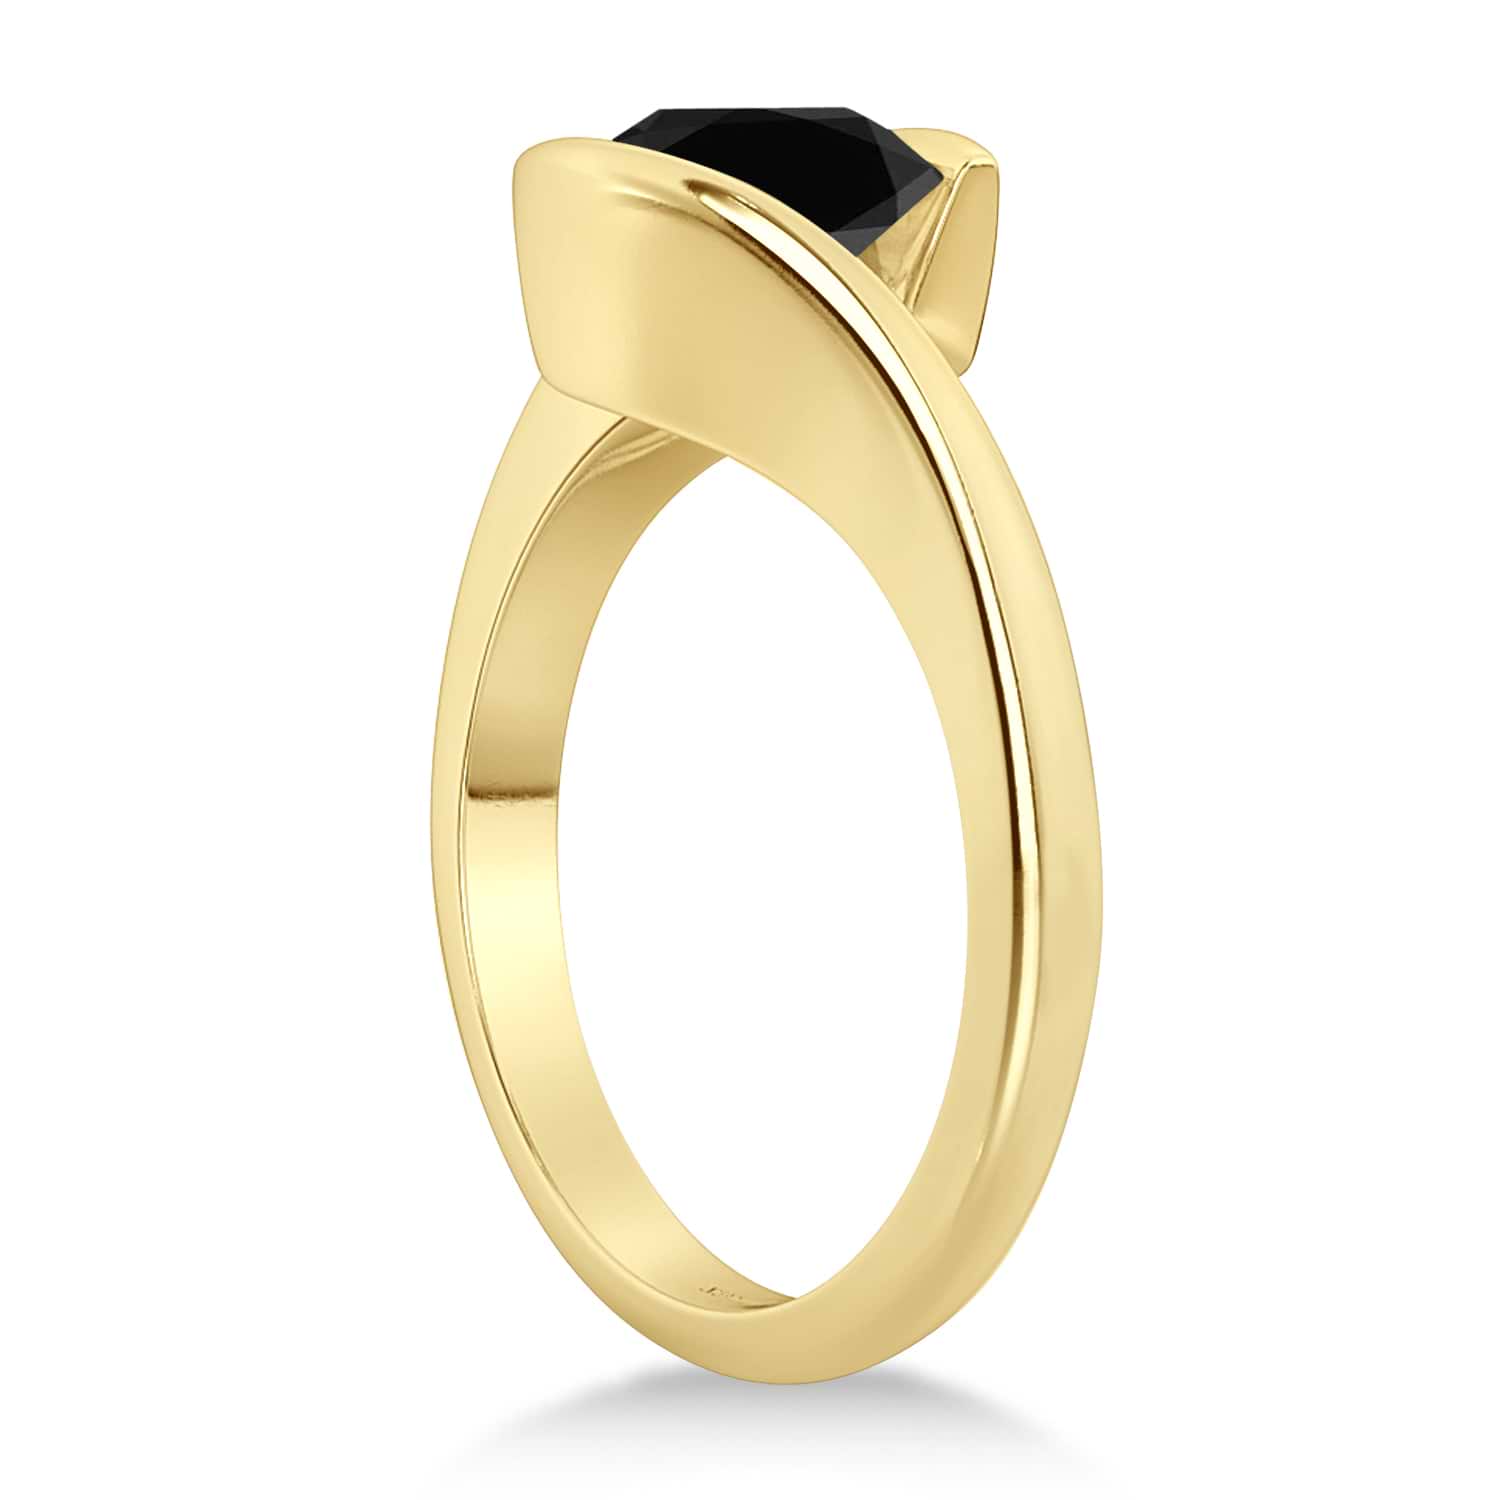 Tension Set Solitaire Black Diamond Engagement Ring 14k Yellow Gold 1.25ct